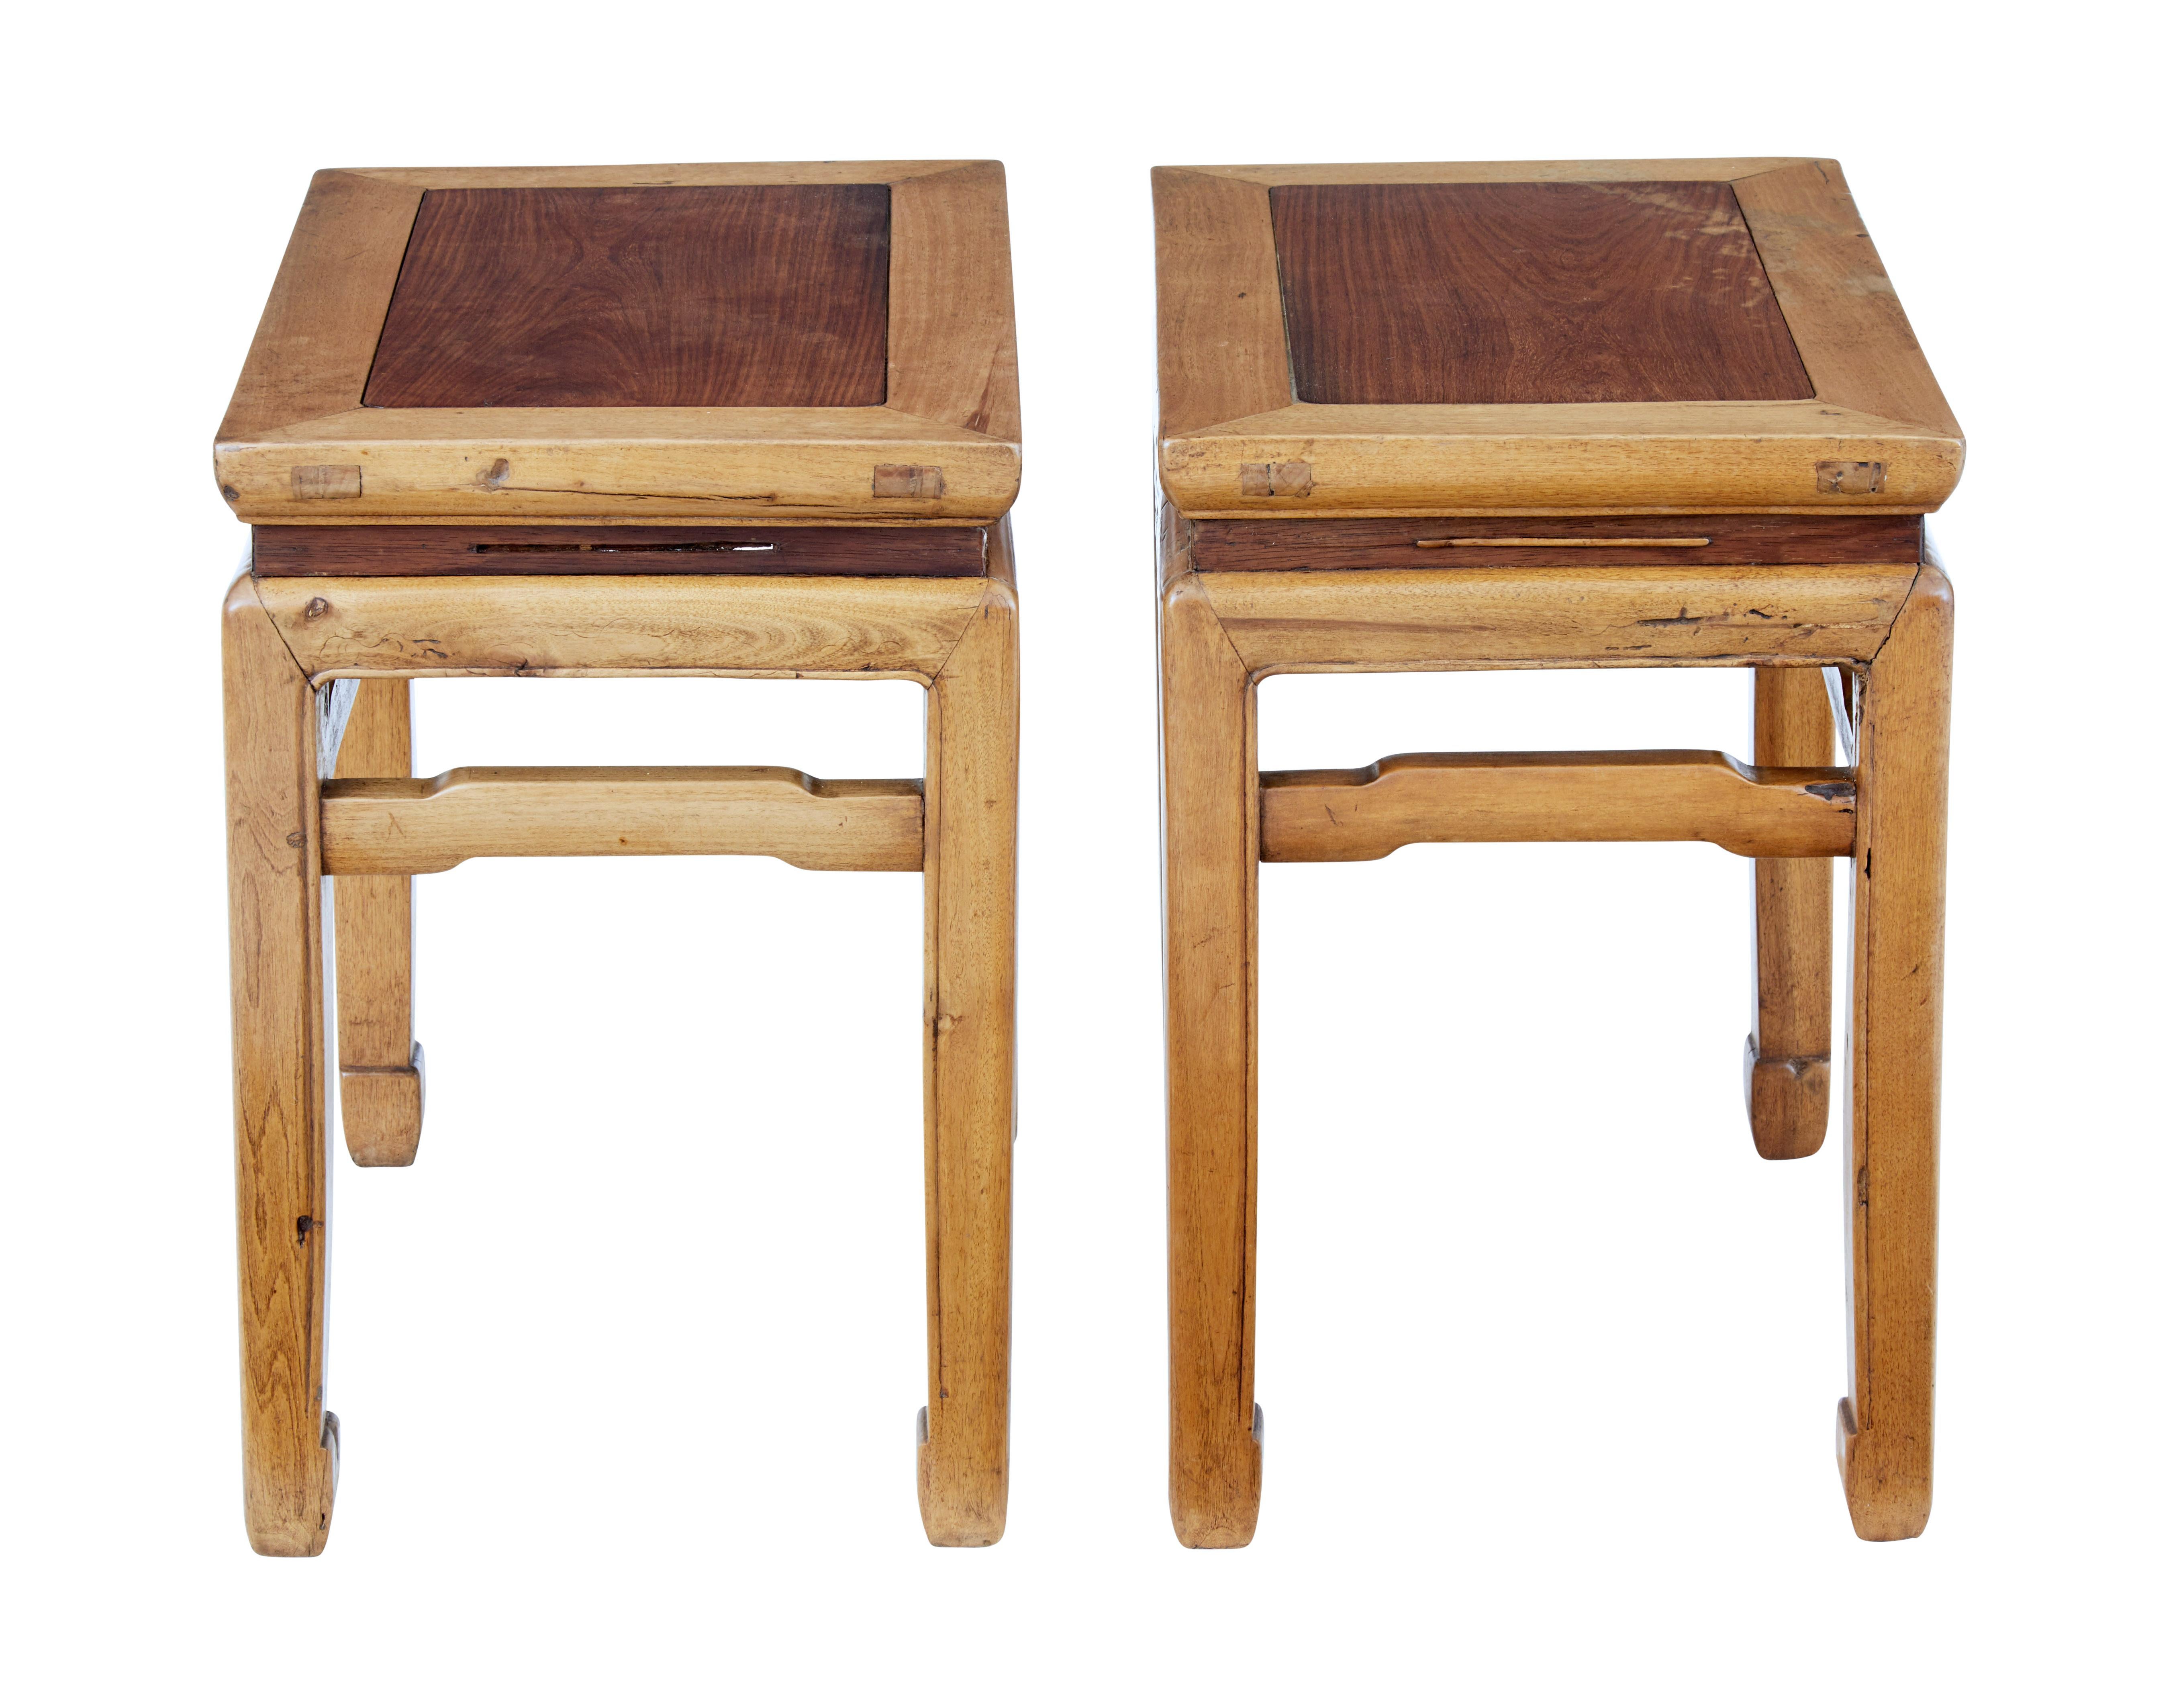 Pair of late 19th century Chinese hardwood occasional tables, circa 1890.

Good quality pair of Chinese export stools which would make ideal lamp tables.

Hardwood similar to elm, with contrasting inset top and band below the top